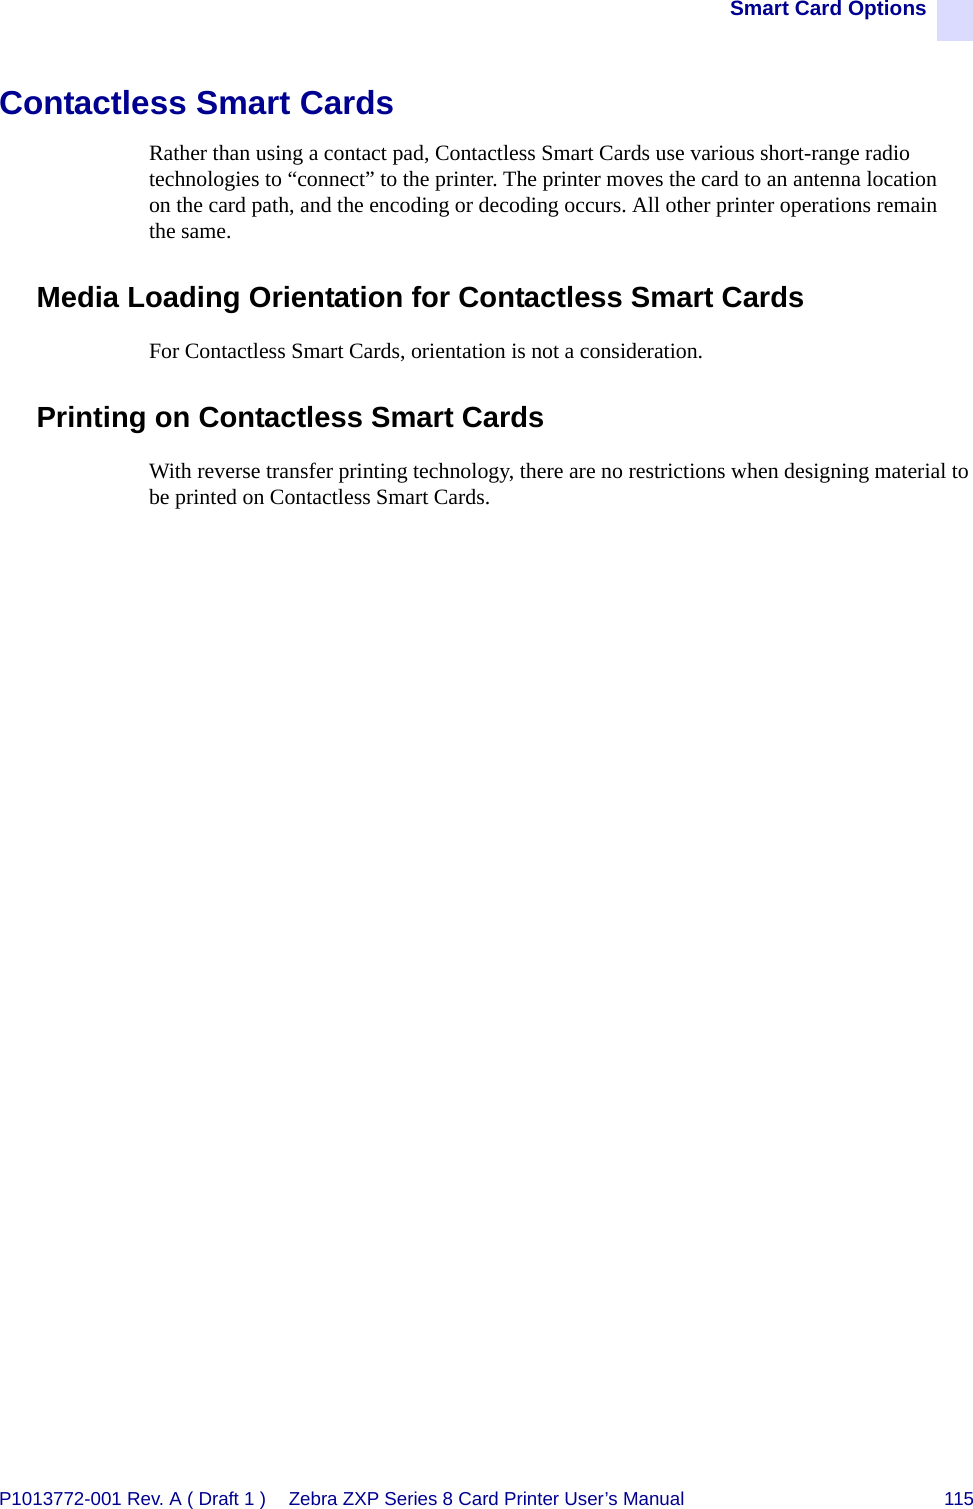 Smart Card OptionsP1013772-001 Rev. A ( Draft 1 ) Zebra ZXP Series 8 Card Printer User’s Manual 115Contactless Smart CardsRather than using a contact pad, Contactless Smart Cards use various short-range radio technologies to “connect” to the printer. The printer moves the card to an antenna location on the card path, and the encoding or decoding occurs. All other printer operations remain the same.Media Loading Orientation for Contactless Smart CardsFor Contactless Smart Cards, orientation is not a consideration.Printing on Contactless Smart CardsWith reverse transfer printing technology, there are no restrictions when designing material to be printed on Contactless Smart Cards.